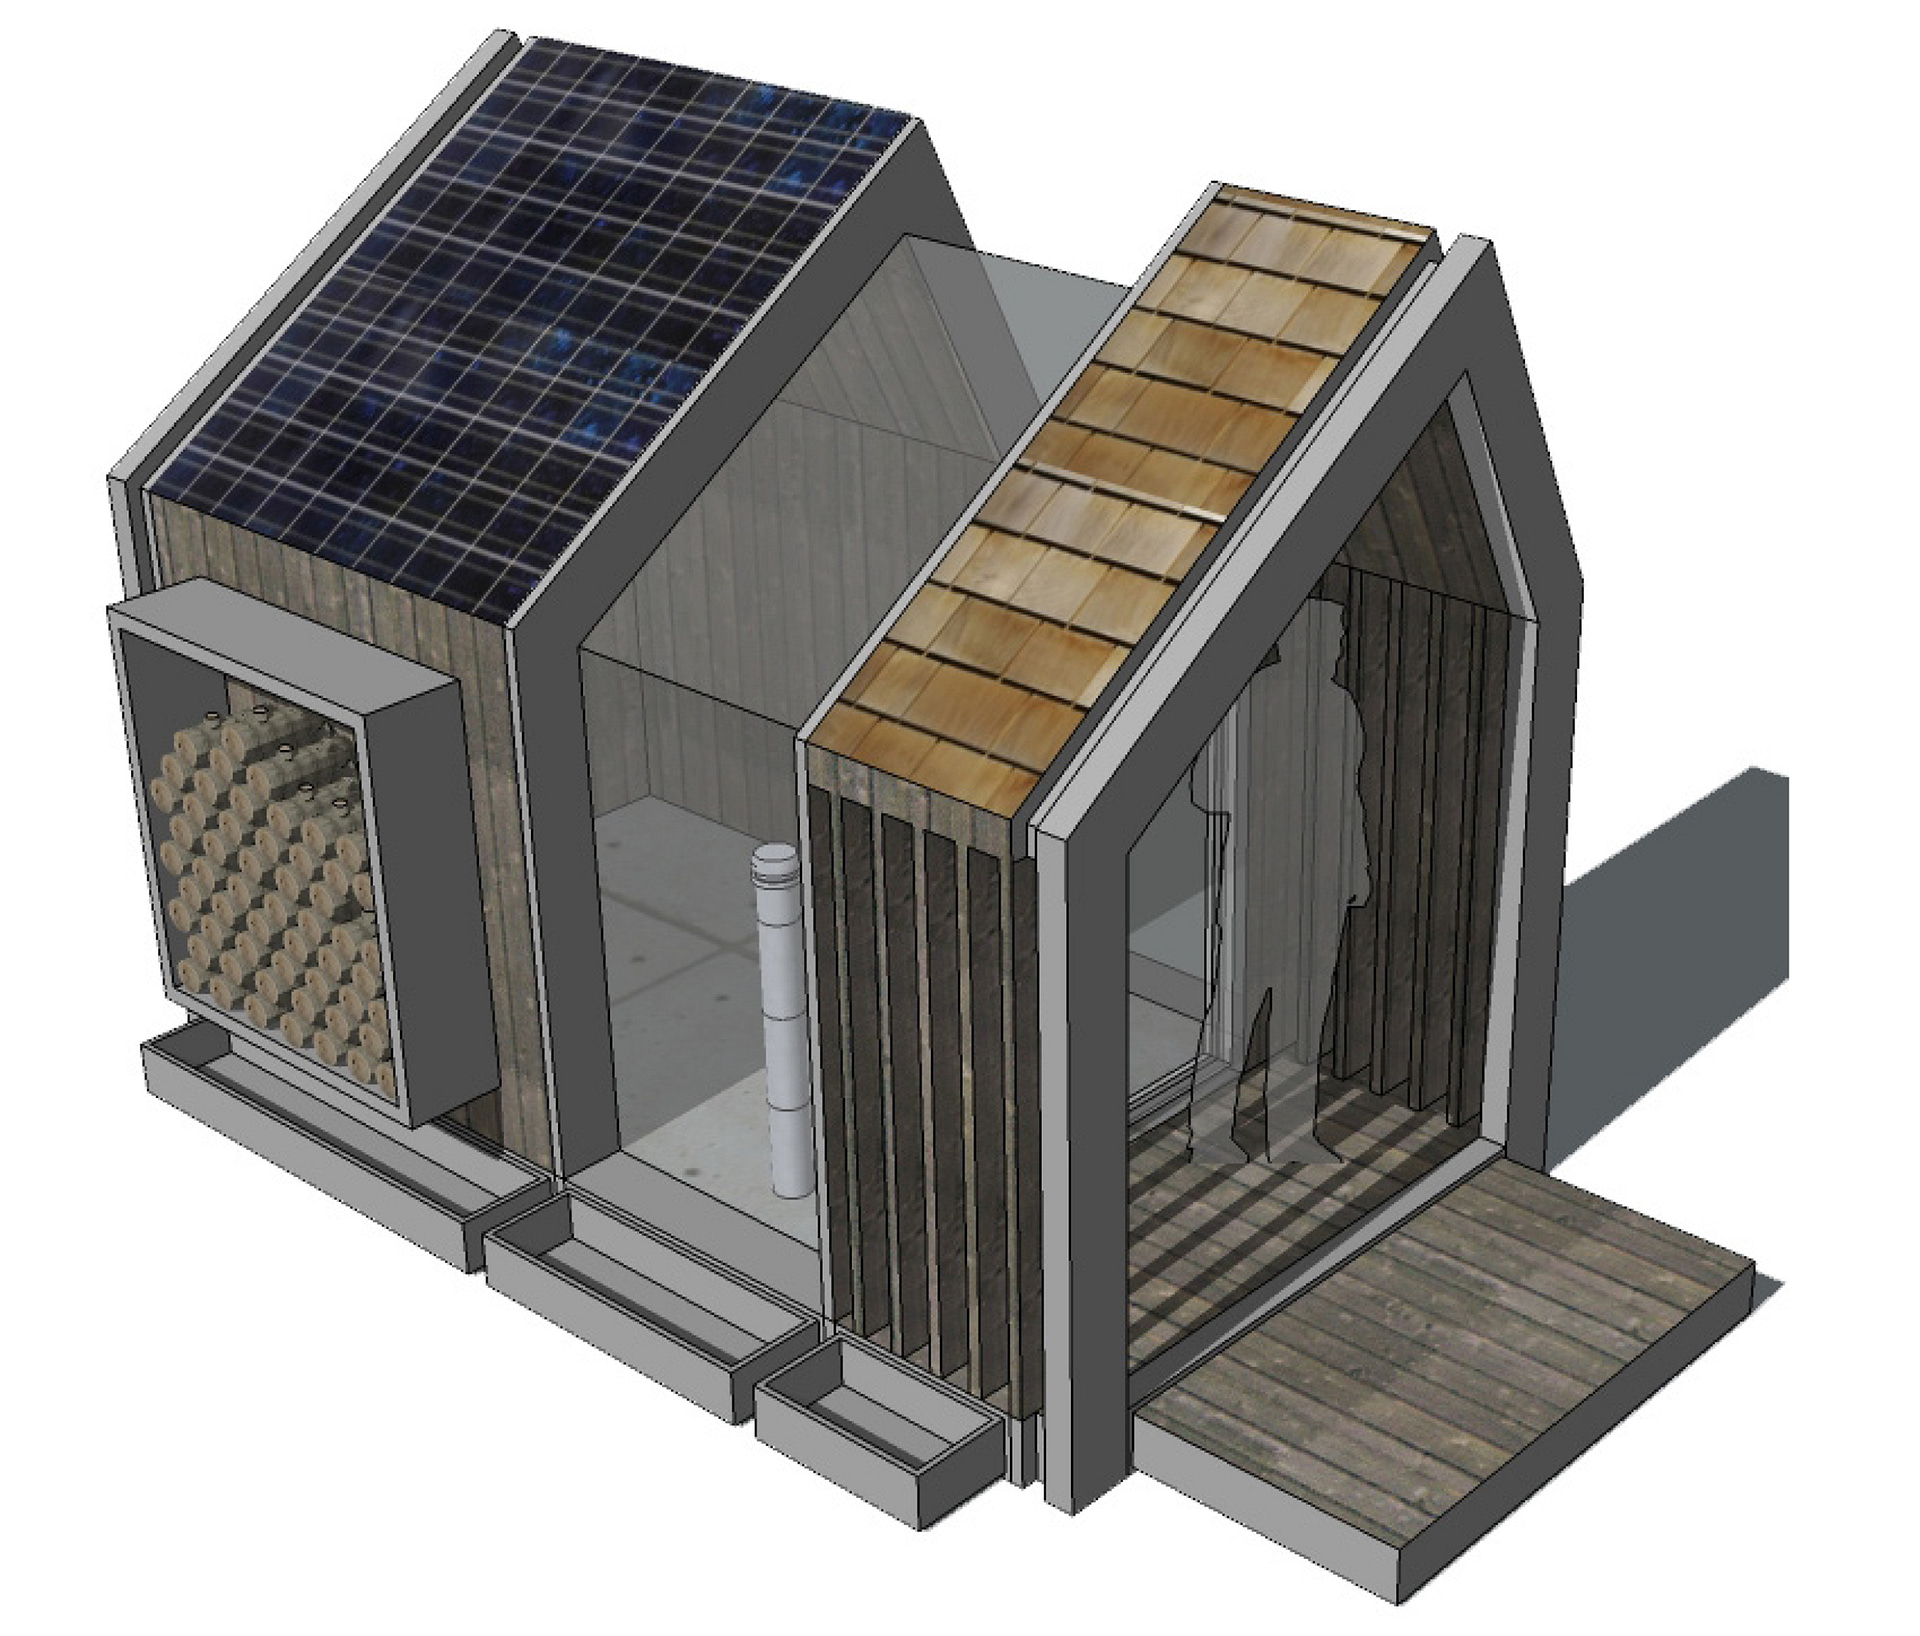 RSAW Redesigning the Terrace Award - Shed